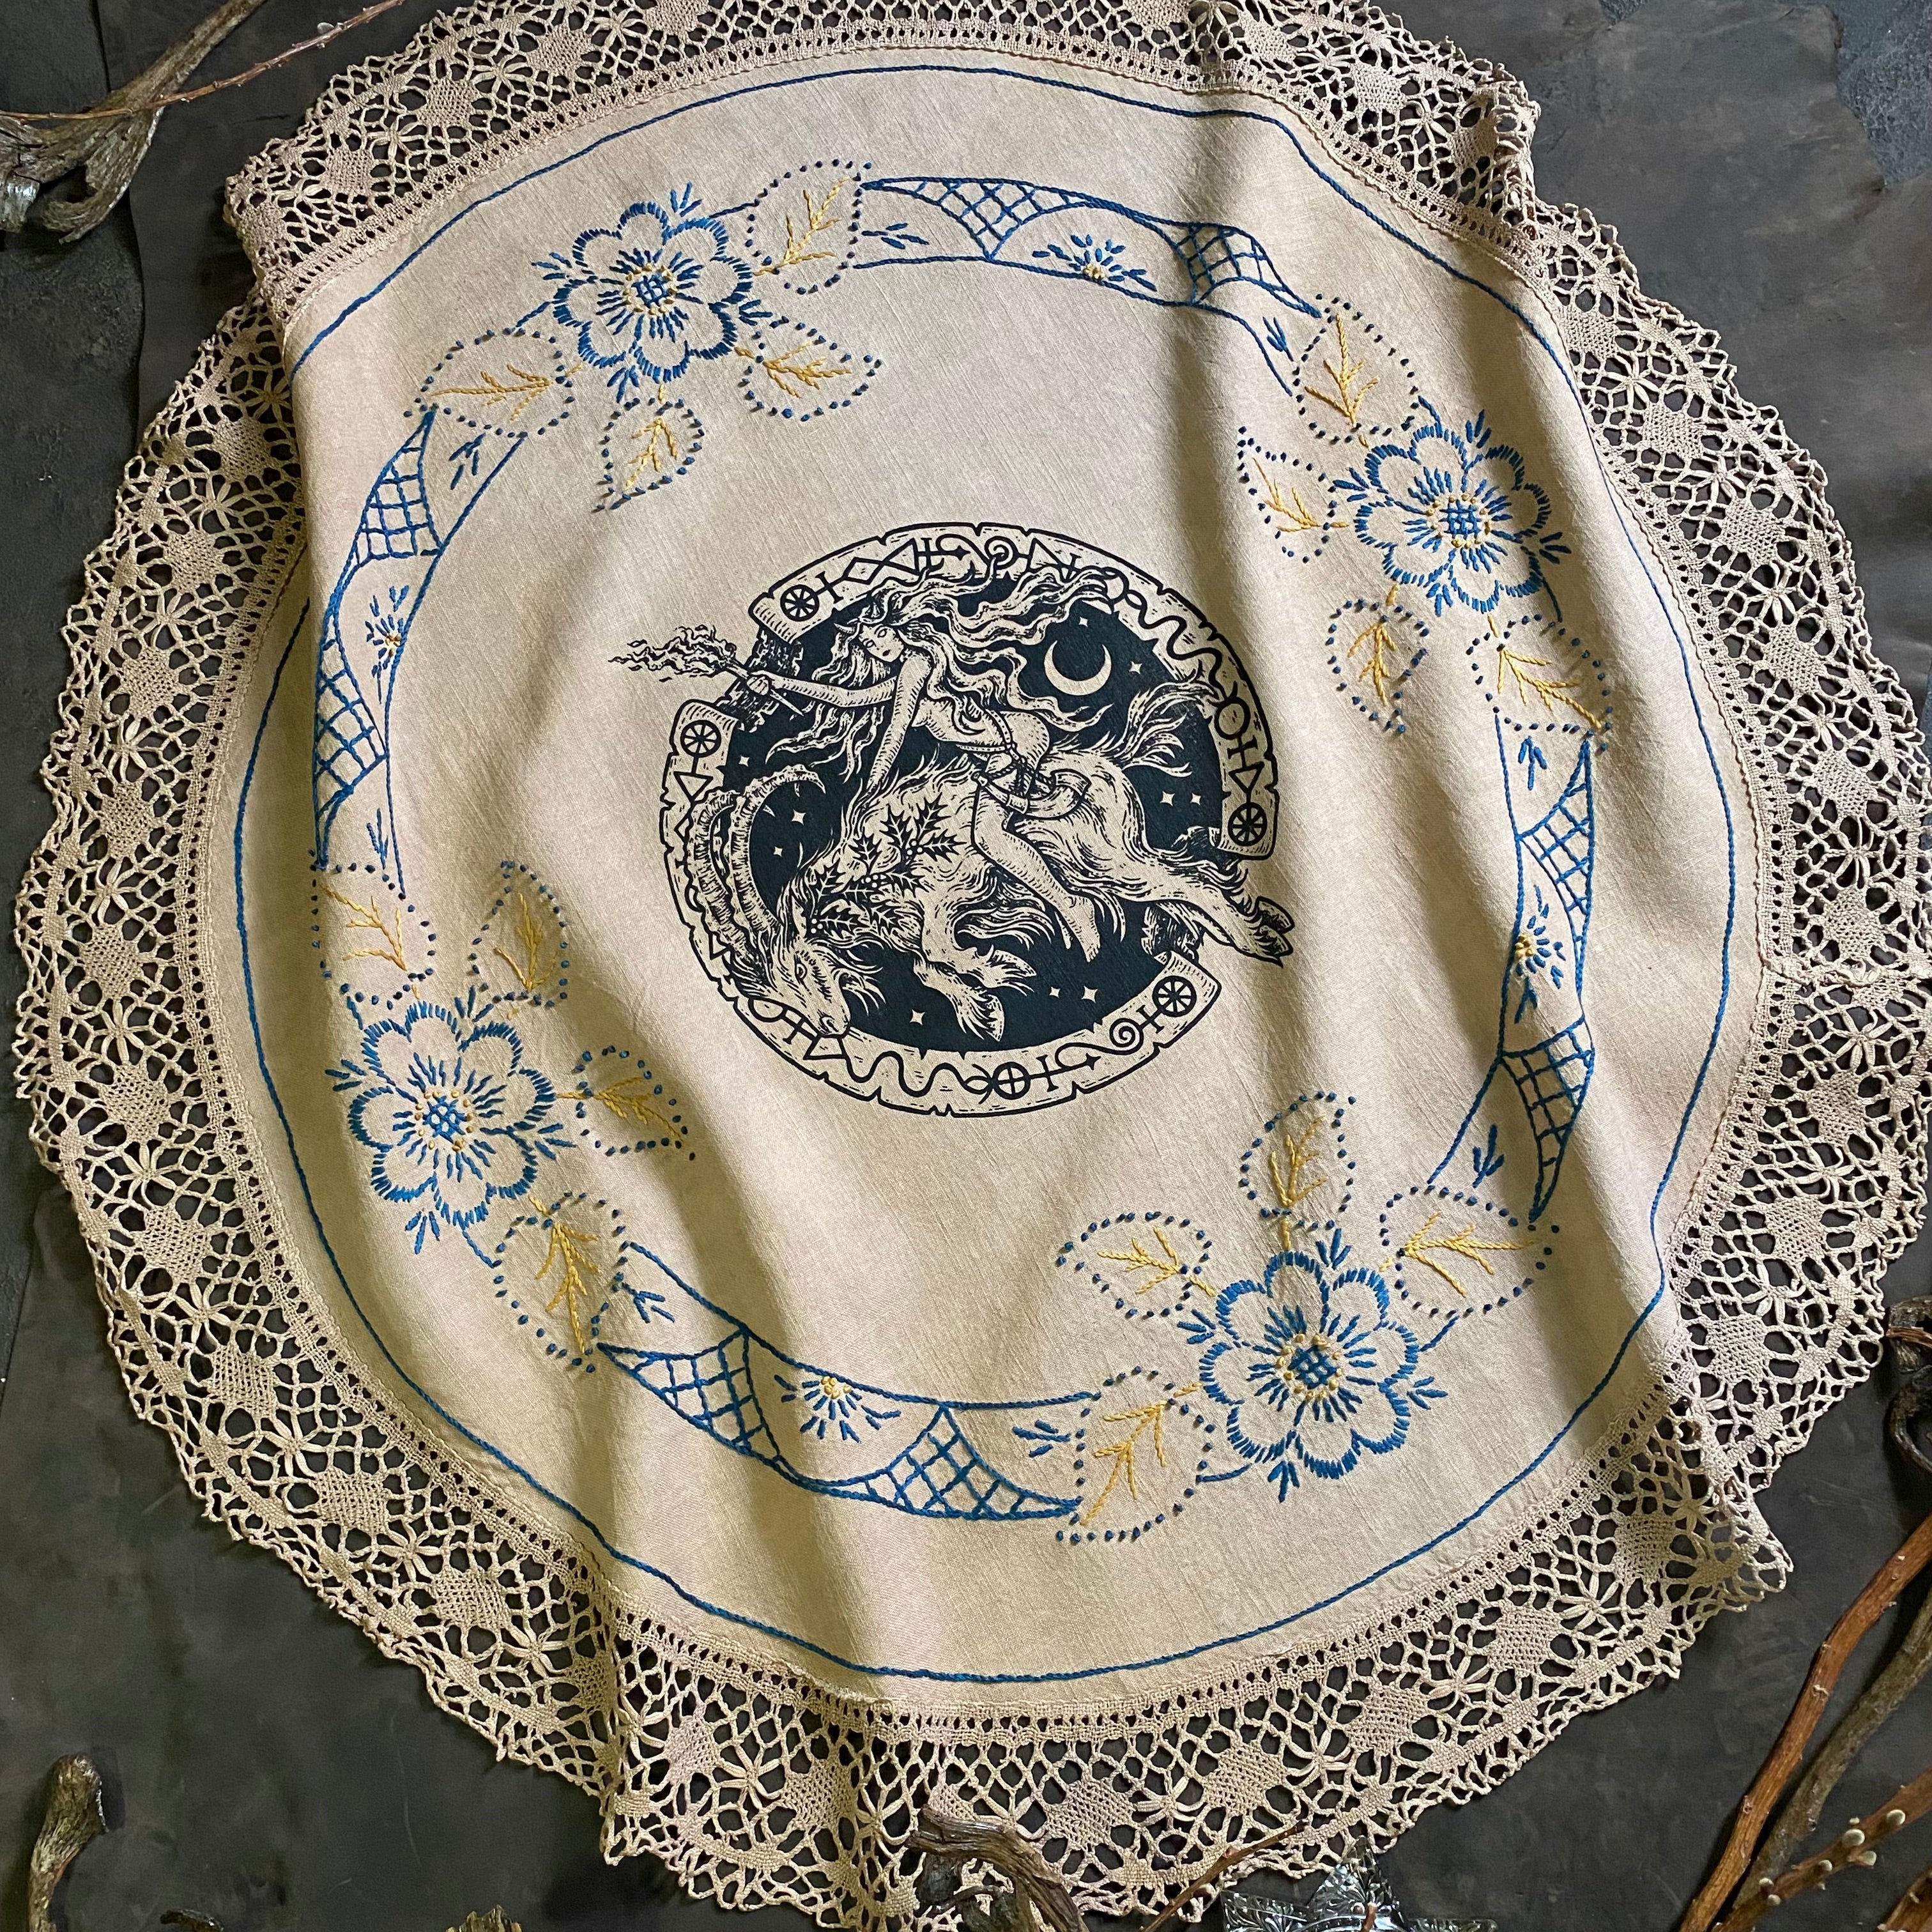 Solstice Ride large round altar cloth in Cornstalk, one-of-a-kind